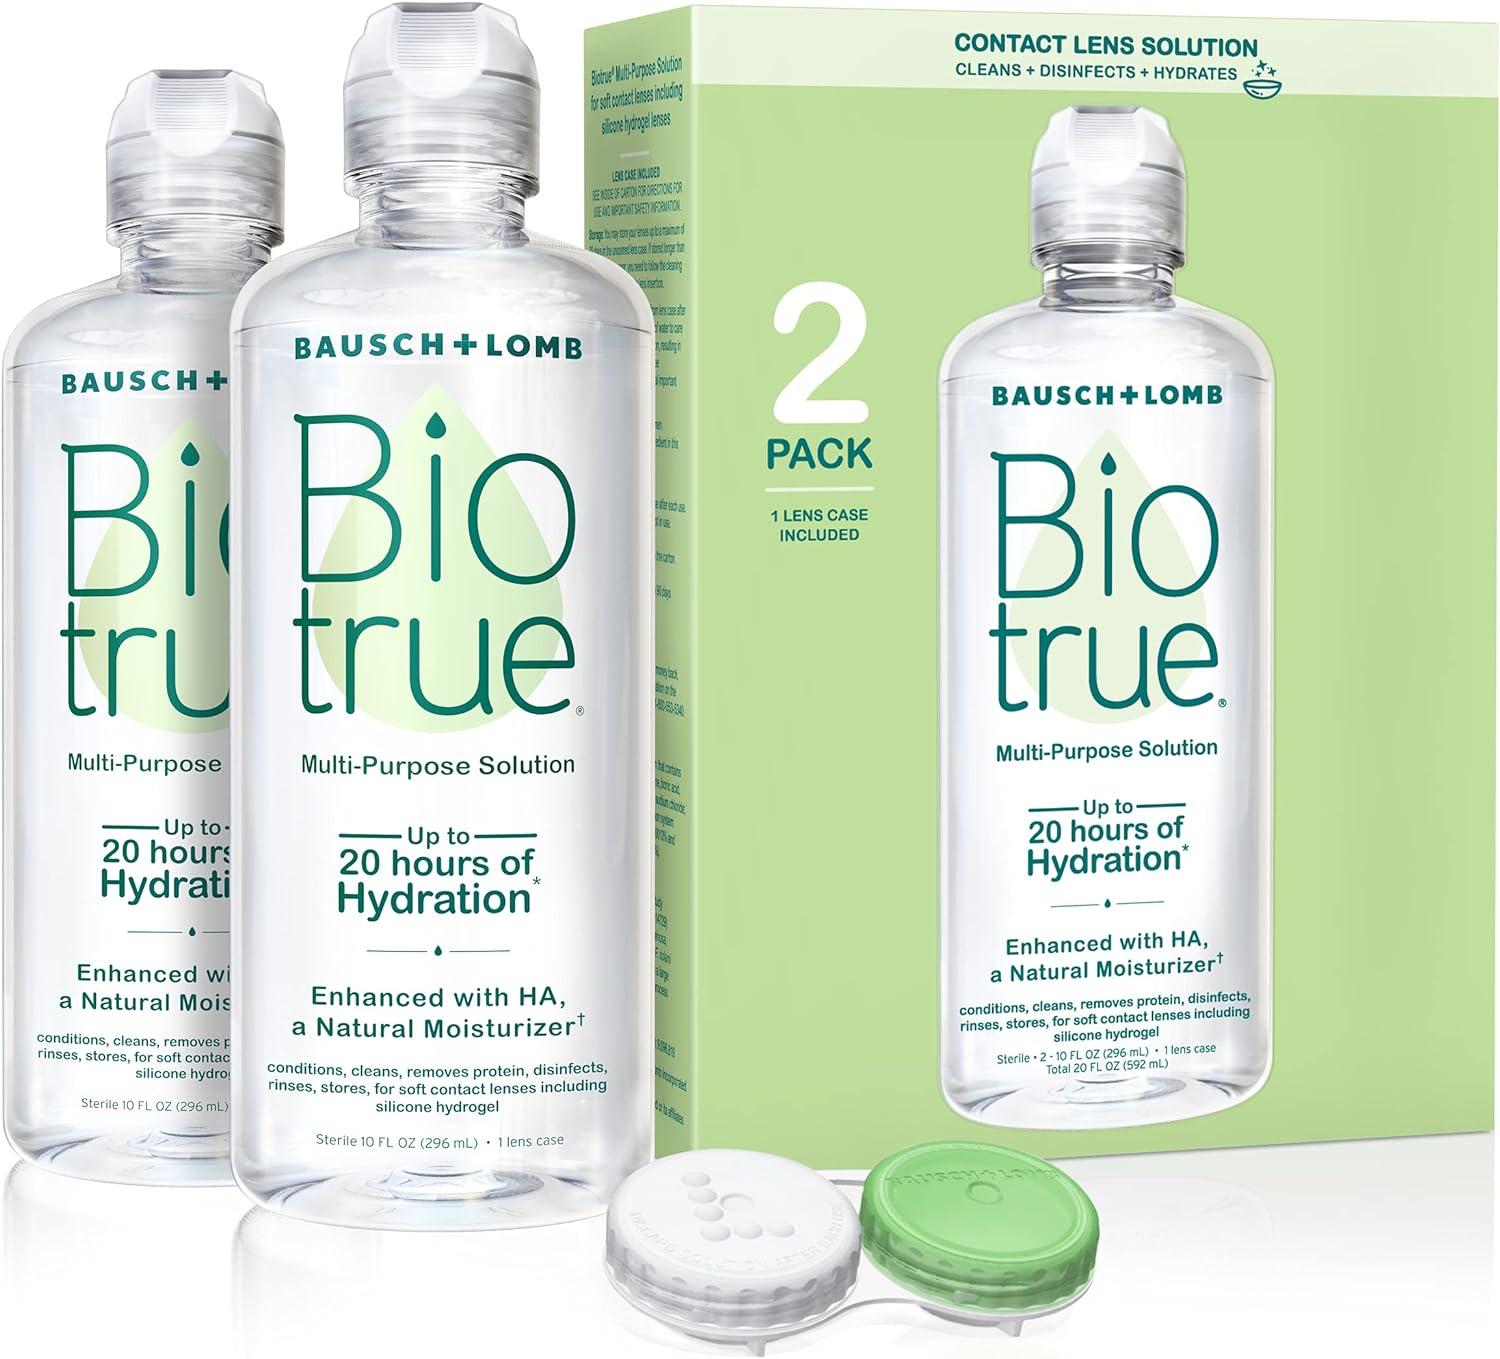 Bausch + Lomb Biotrue Soft Contact Lens Multi-Purpose Solution 2 Pack for $9.67